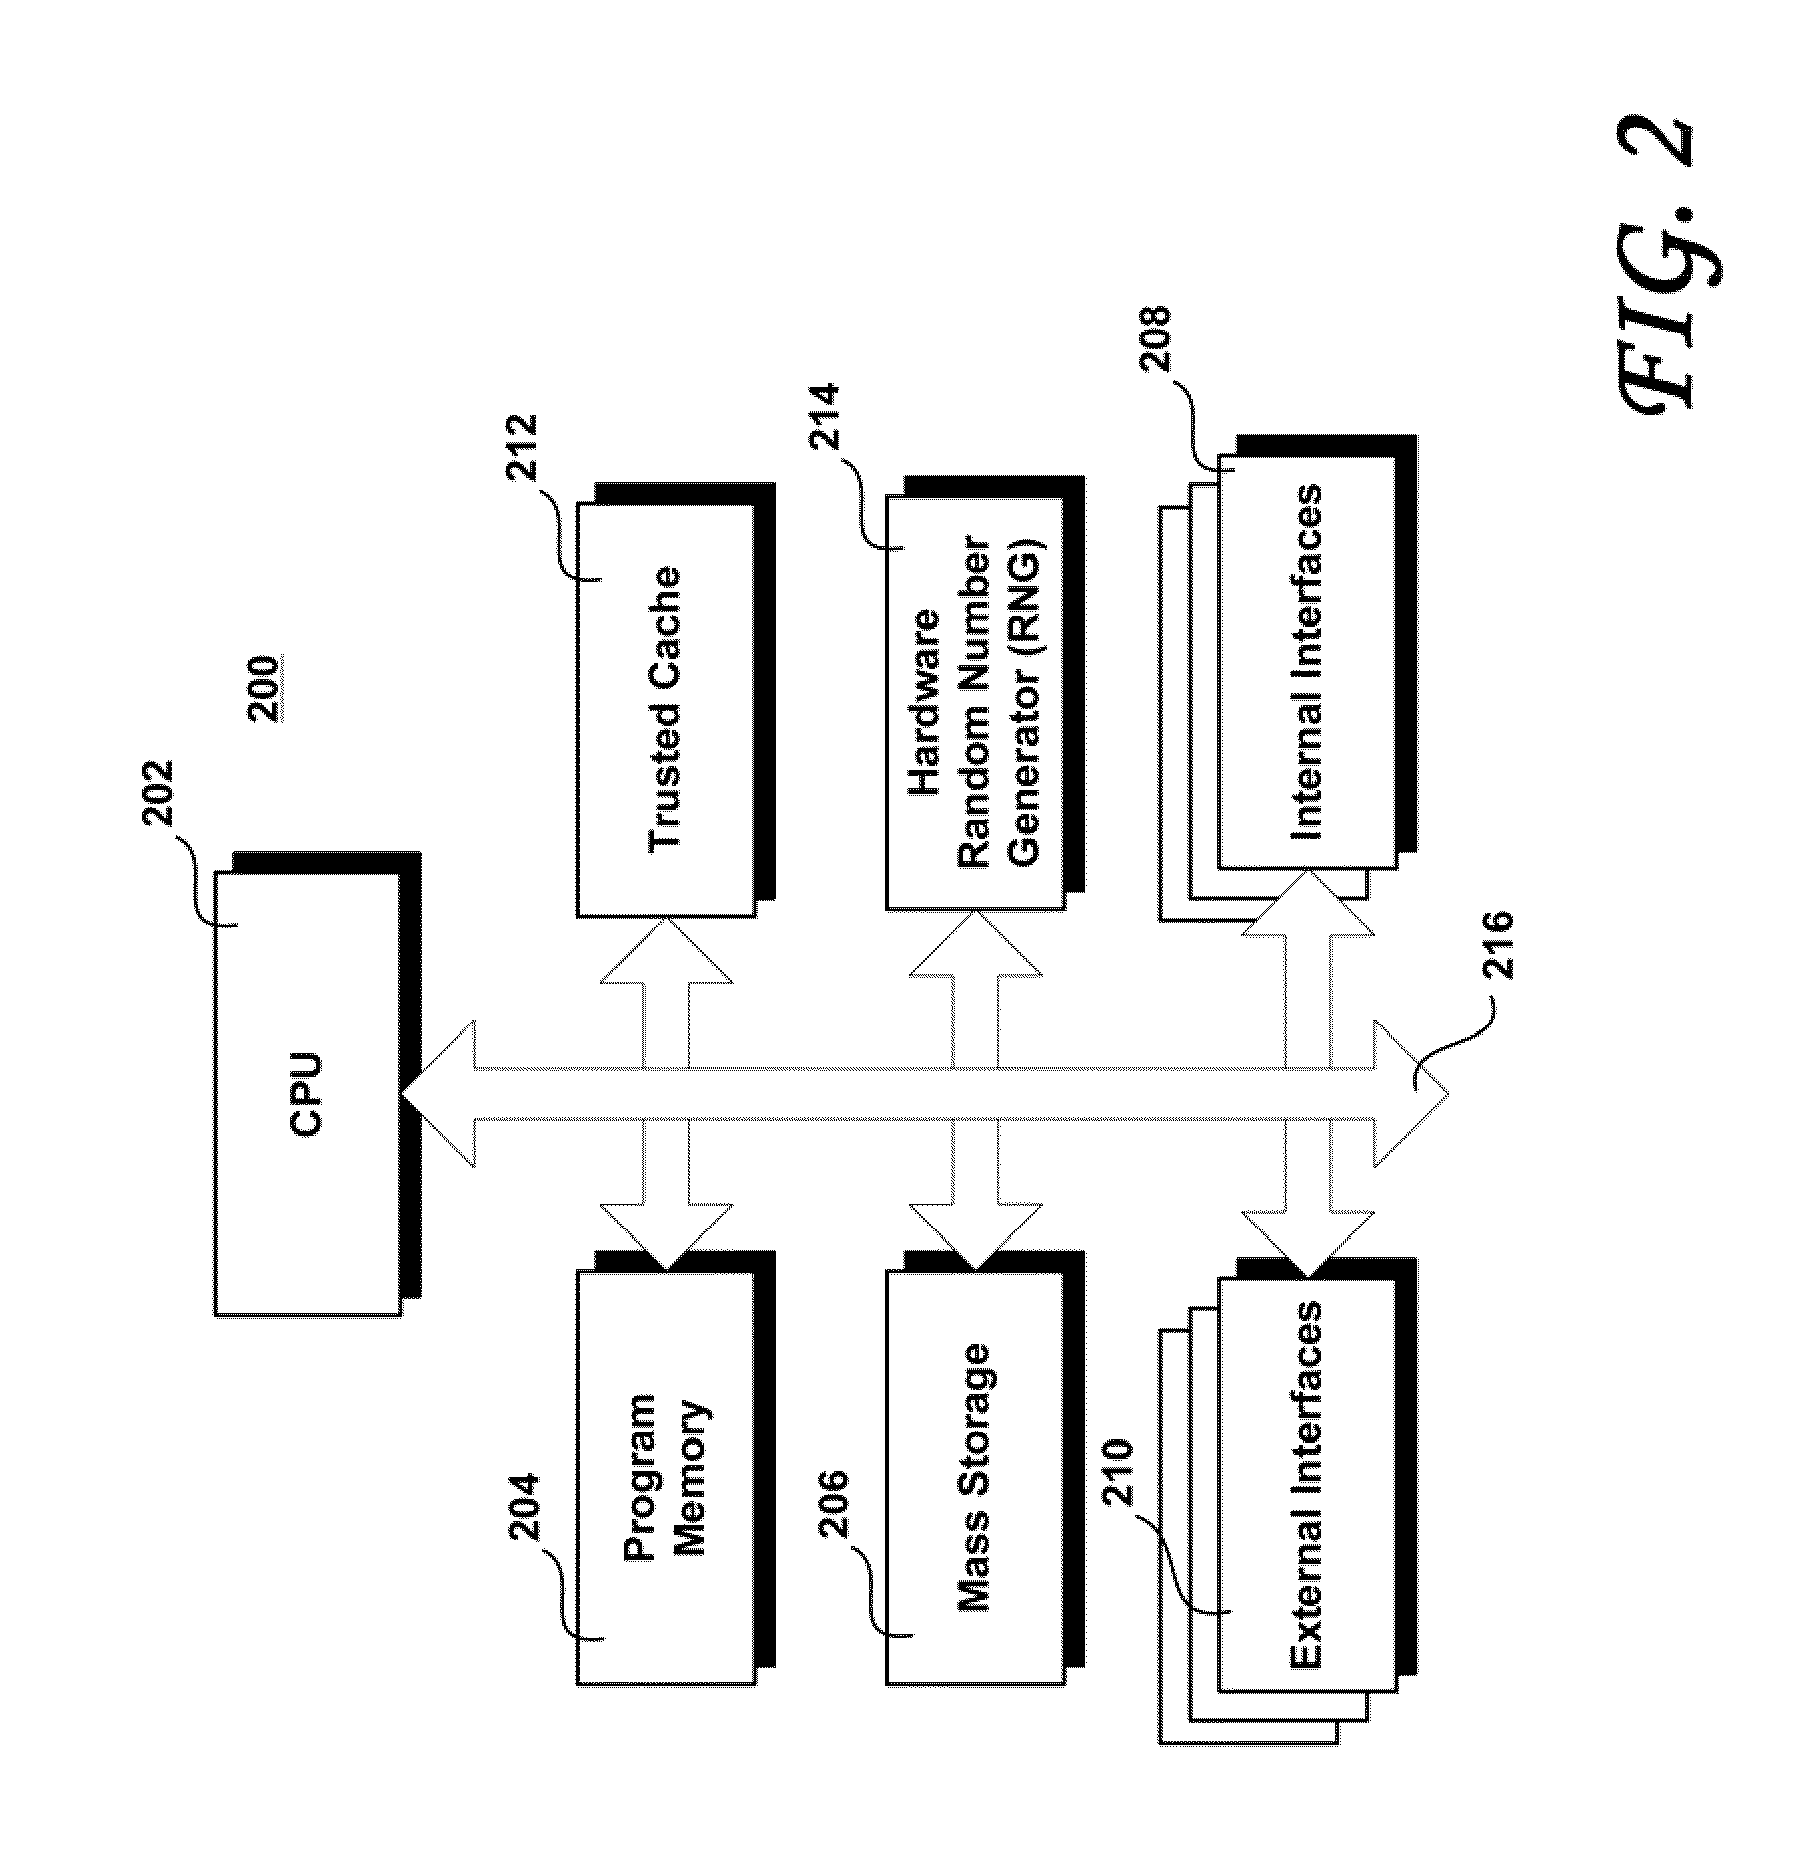 Gaming machine having game play suspension and resumption features using biometrically-based authentication and method of operating same